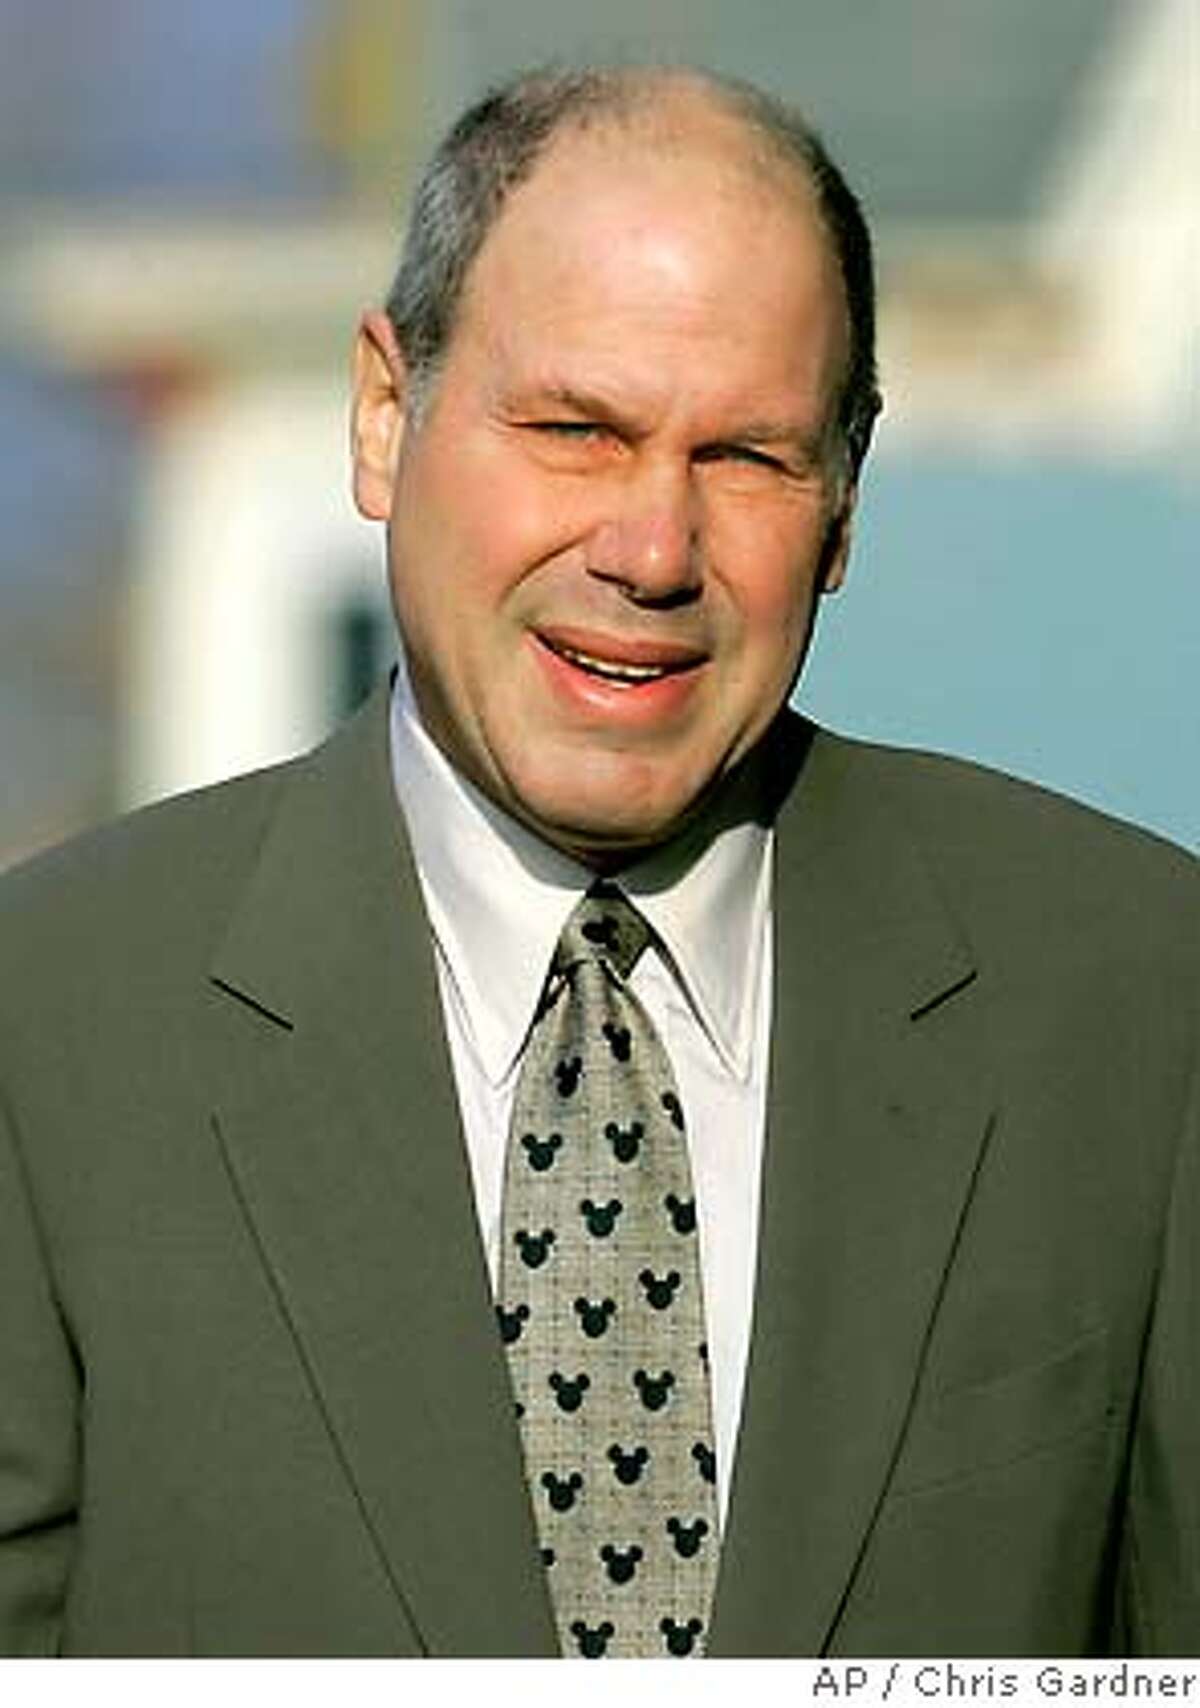 ** FILE ** Disney CEO Michael Eisner arrives at Chancery Court in Georgetown, Del., Thursday, Nov. 18, 2004. The relationship between The Walt Disney Co. and the Weinstein brothers ended Tuesday March 29, 2005. The profitable and prestigious partnership between Disney and the Weinstein brothers soured in recent years as the Weinsteins' ambitions grew, colliding with the need of Disney chief executive Michael Eisner to control the duo.(AP Photo/Chris Gardner) Ran on: 03-31-2005 CEO Michael Eisner clashed with the Weinstein brothers.Ran on: 02-08-2006 3Ms George Buckley will be paid a modest $8.4 million.